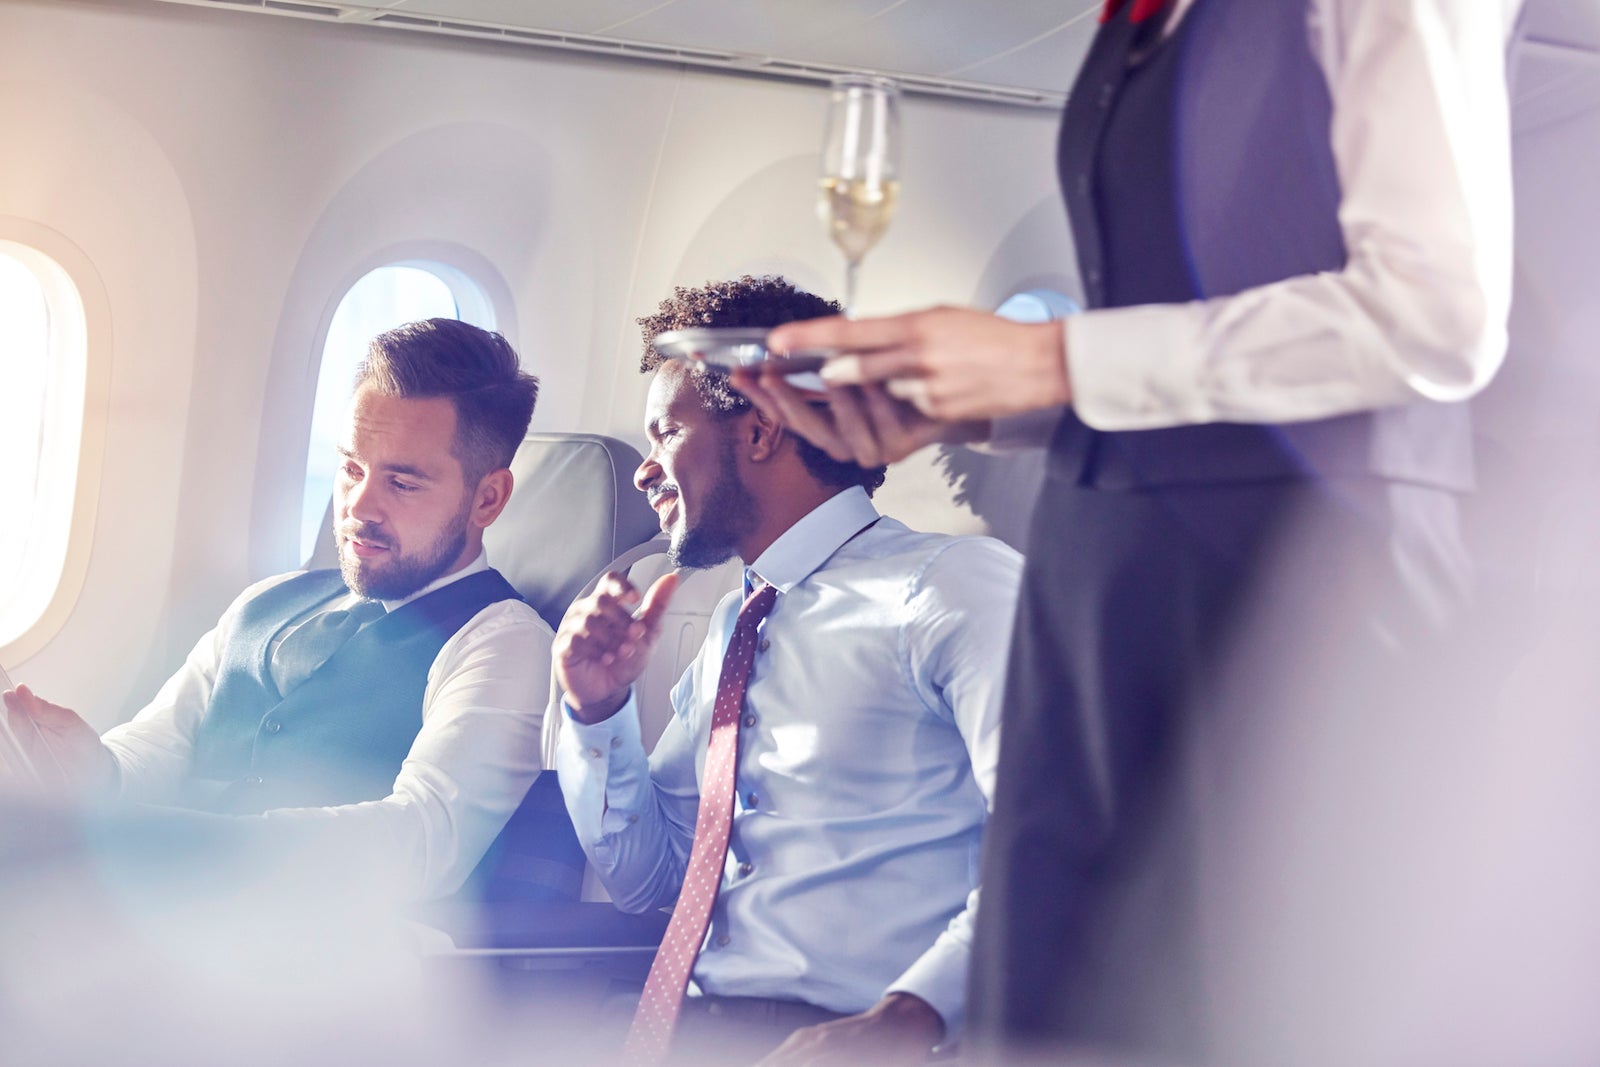 How to survive long flights in economy - Experts share the best tips.